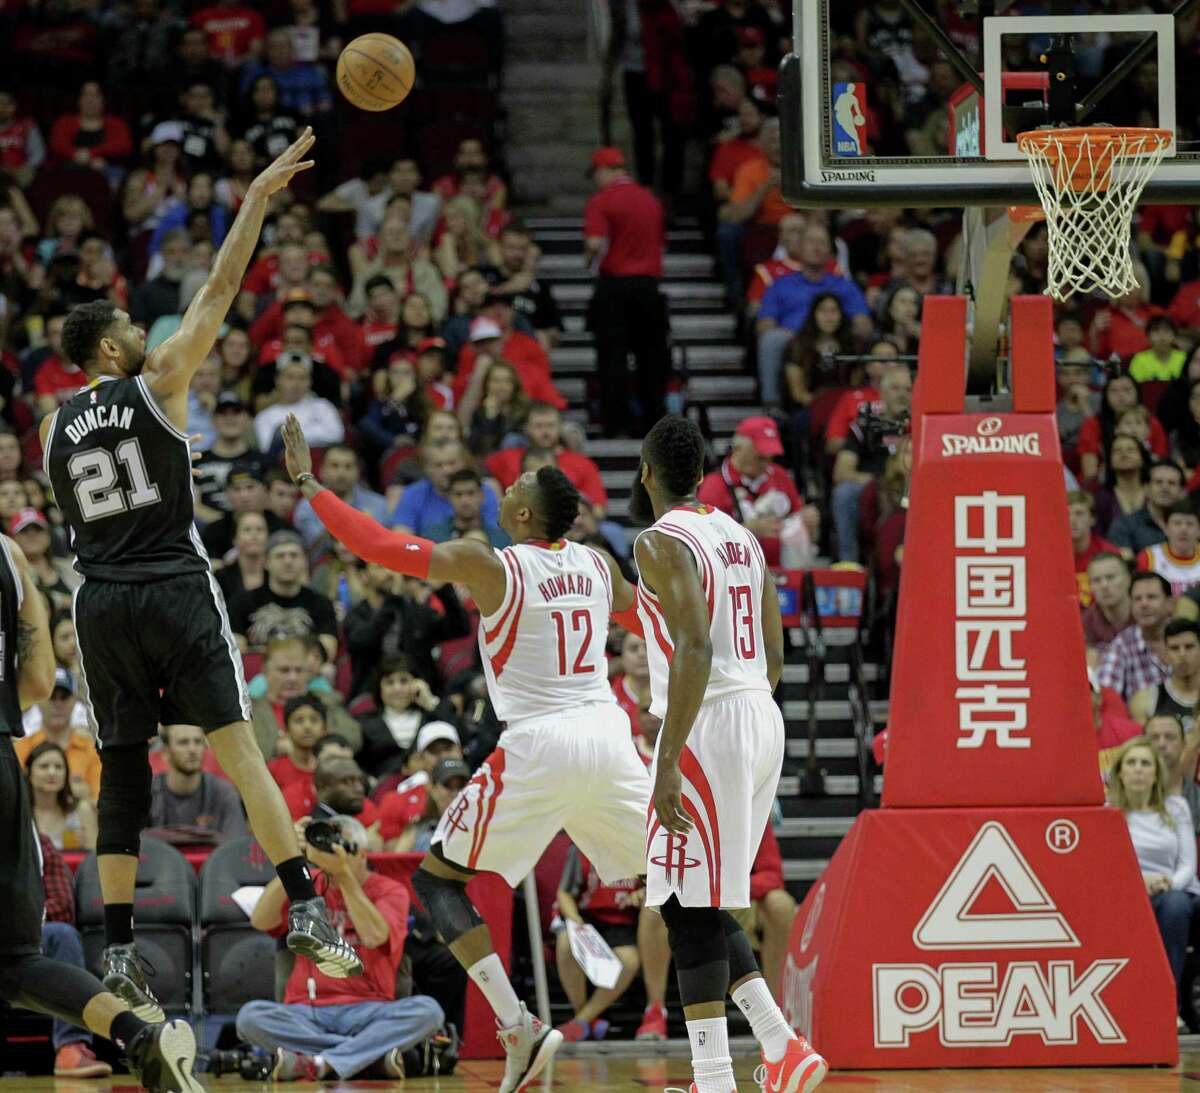 San Antonio Spurs forward Tim Duncan (21) shoots over Houston Rockets center Dwight Howard (12) as guard James Harden (13) looks on during the first half of an NBA basketball game Friday, April 10, 2015, in Houston.